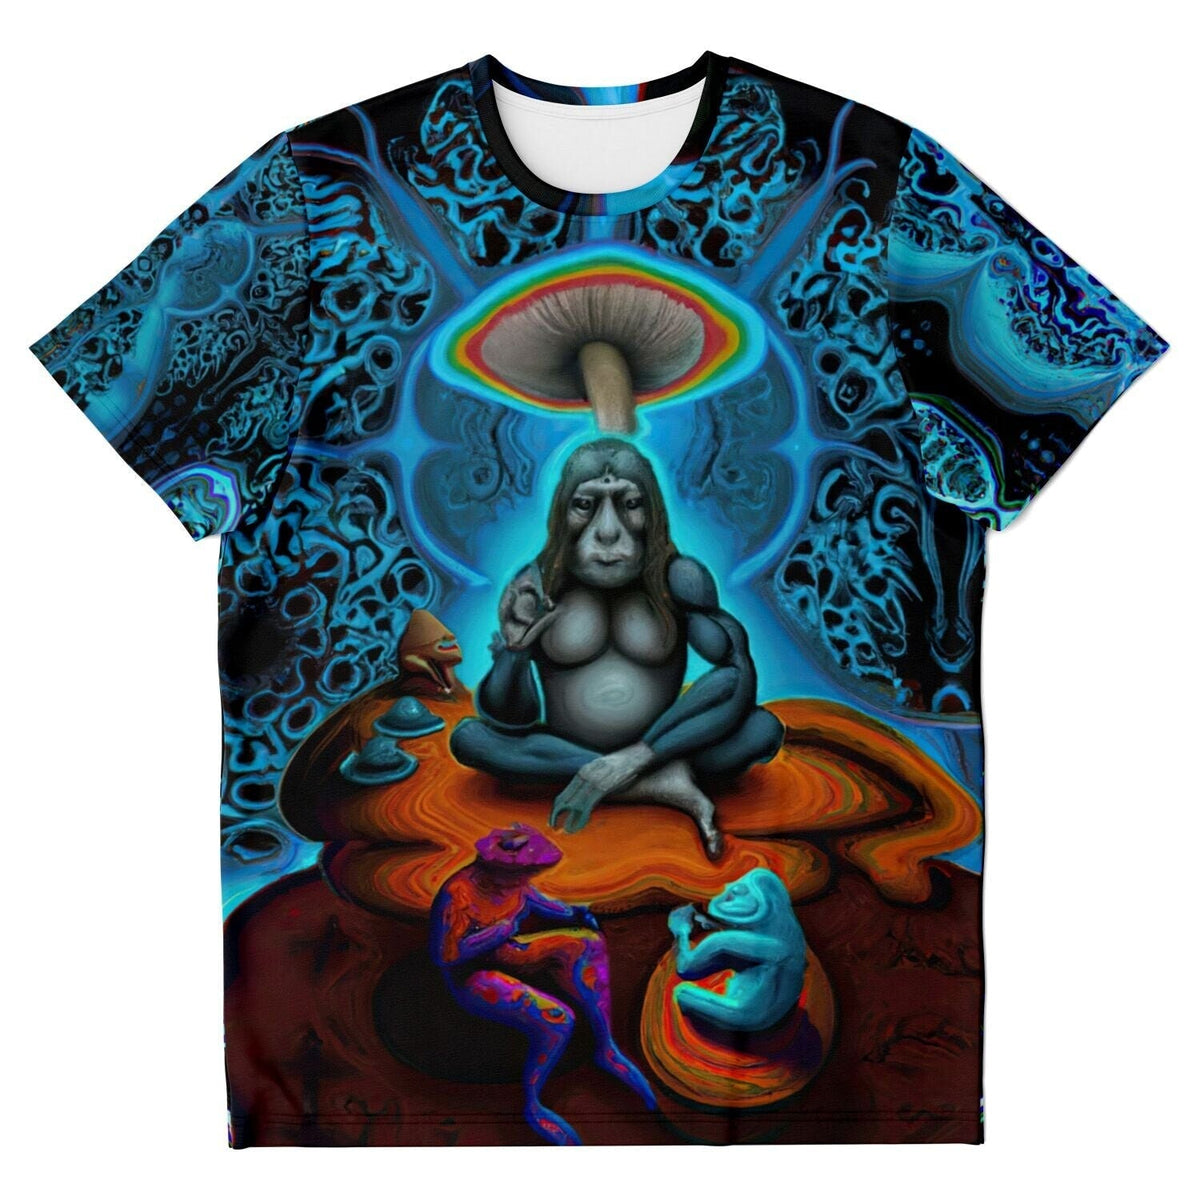 Stoned Ape Theory | Psychedelic Evolution | DMT, LSD, Ayahuasca, McKenna | Trippy Digital Art T-Shirt - Sacred Surreal